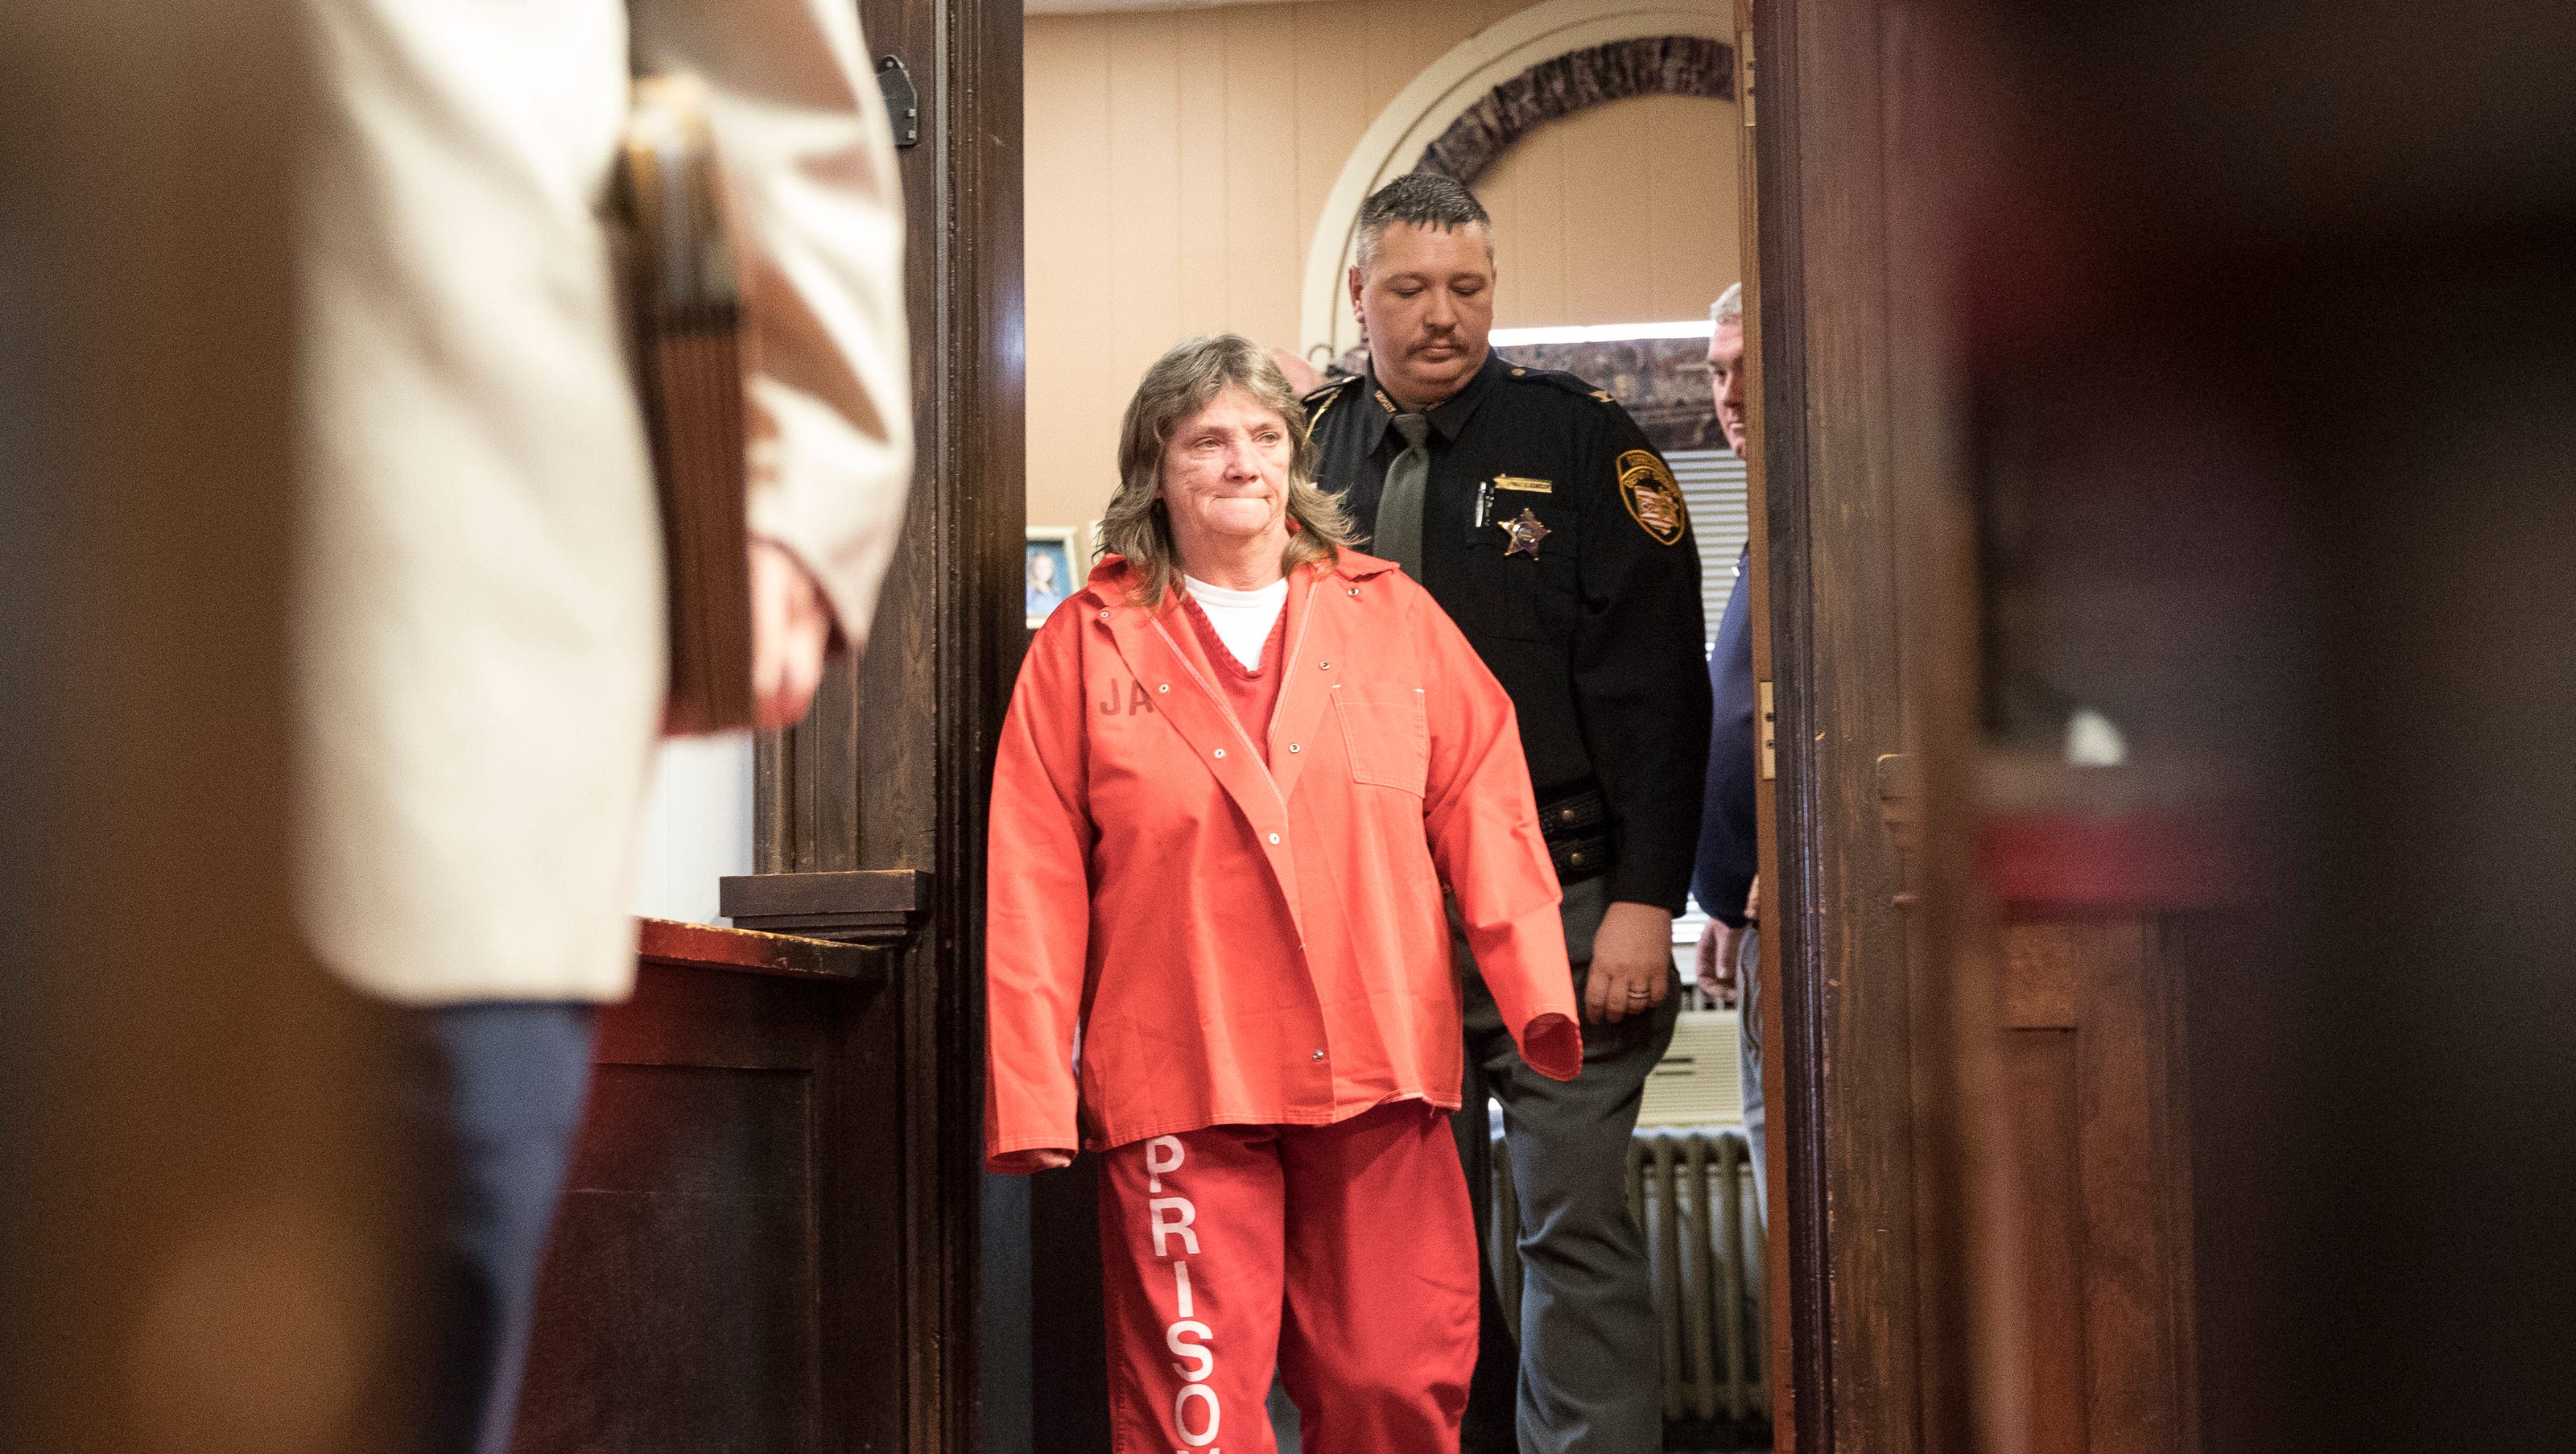 Rita Newcomb Grandmother Reaches Plea Deal In Pike County Case 